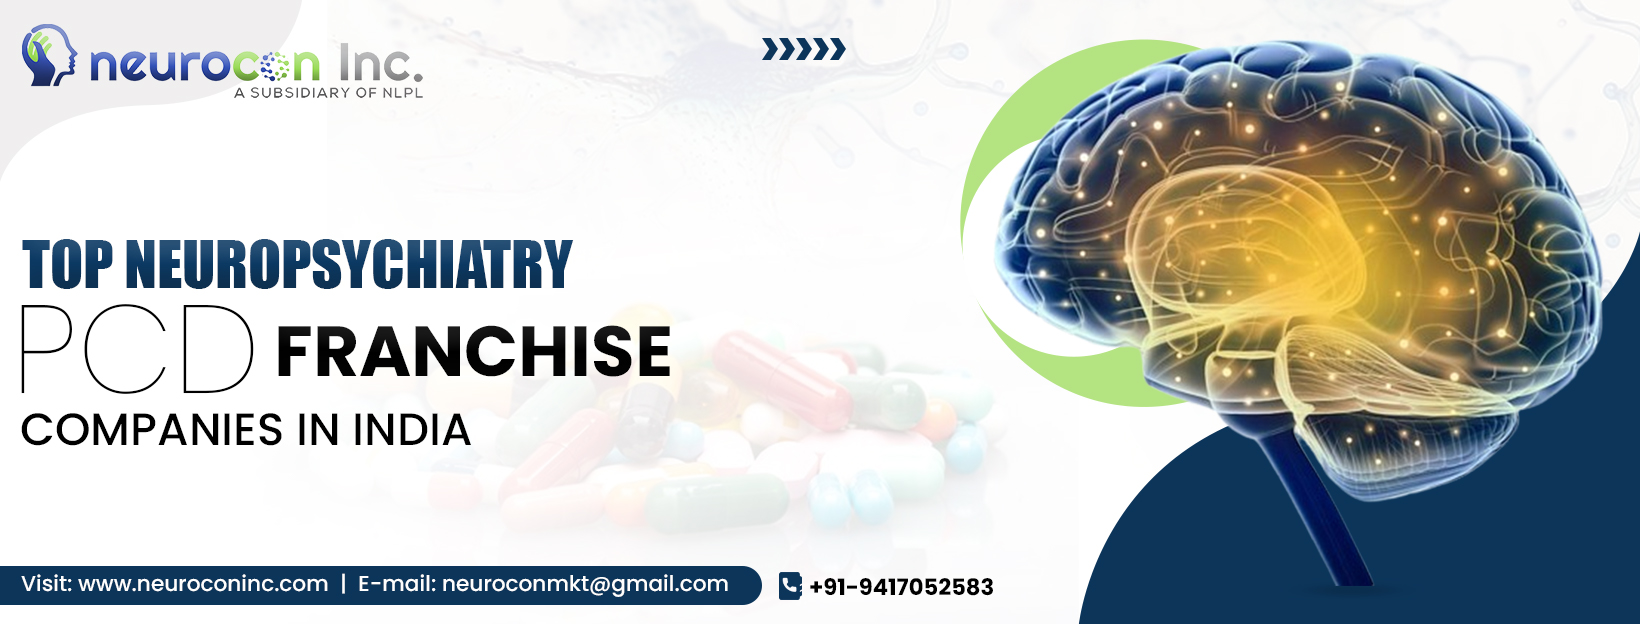 Top Neuropsychiatry PCD Franchise Companies in India